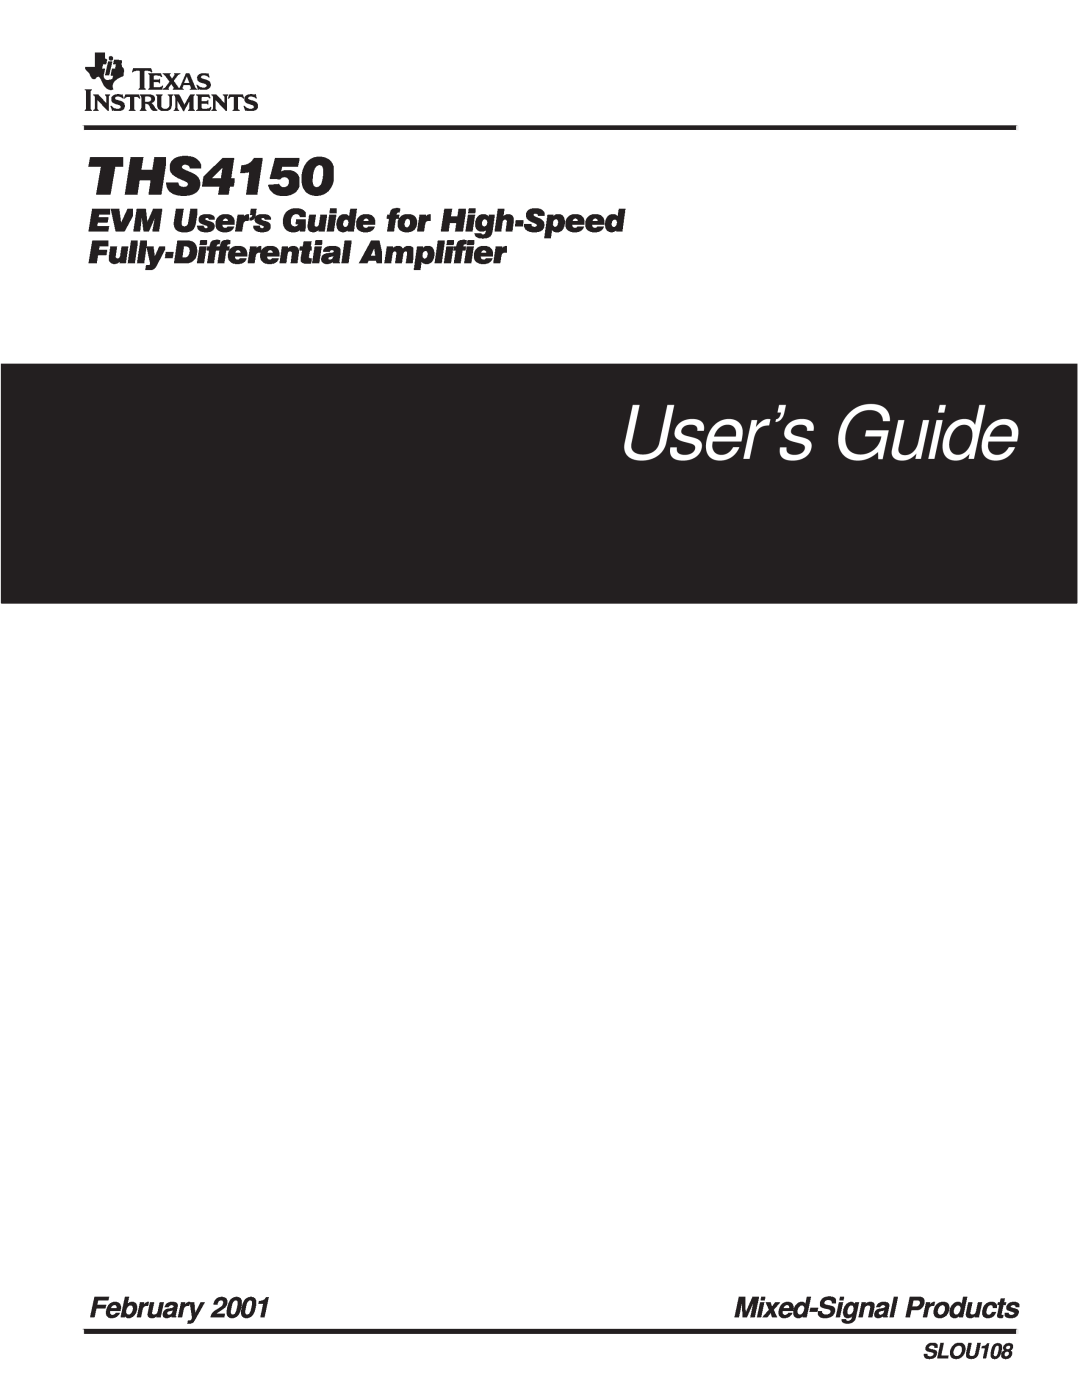 Texas Instruments THS4150 manual EVM Users Guide for HighSpeed, FullyDifferential Amplifier, February, SLOU108 